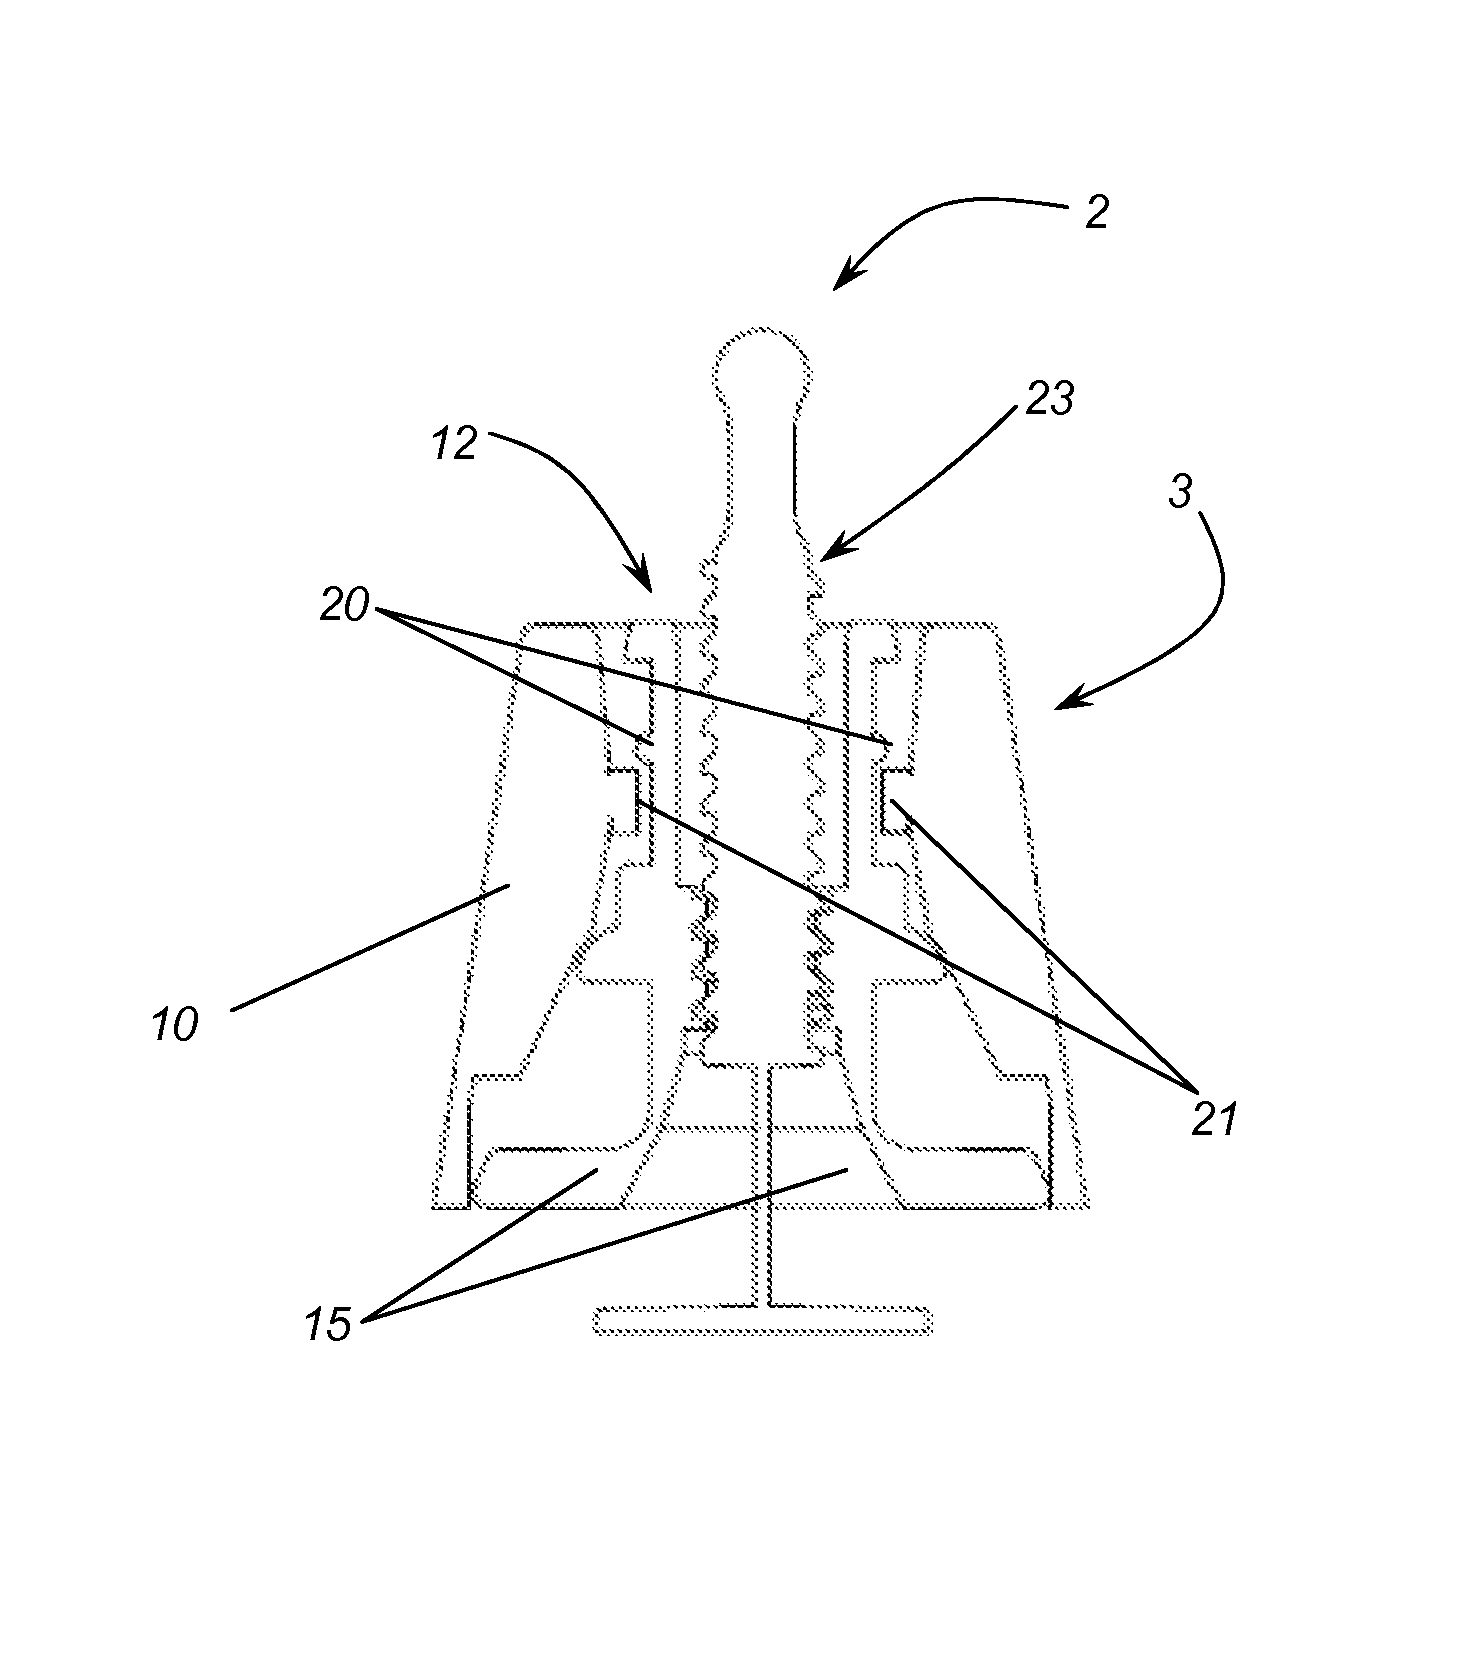 Leveling device for laying tiles or the like